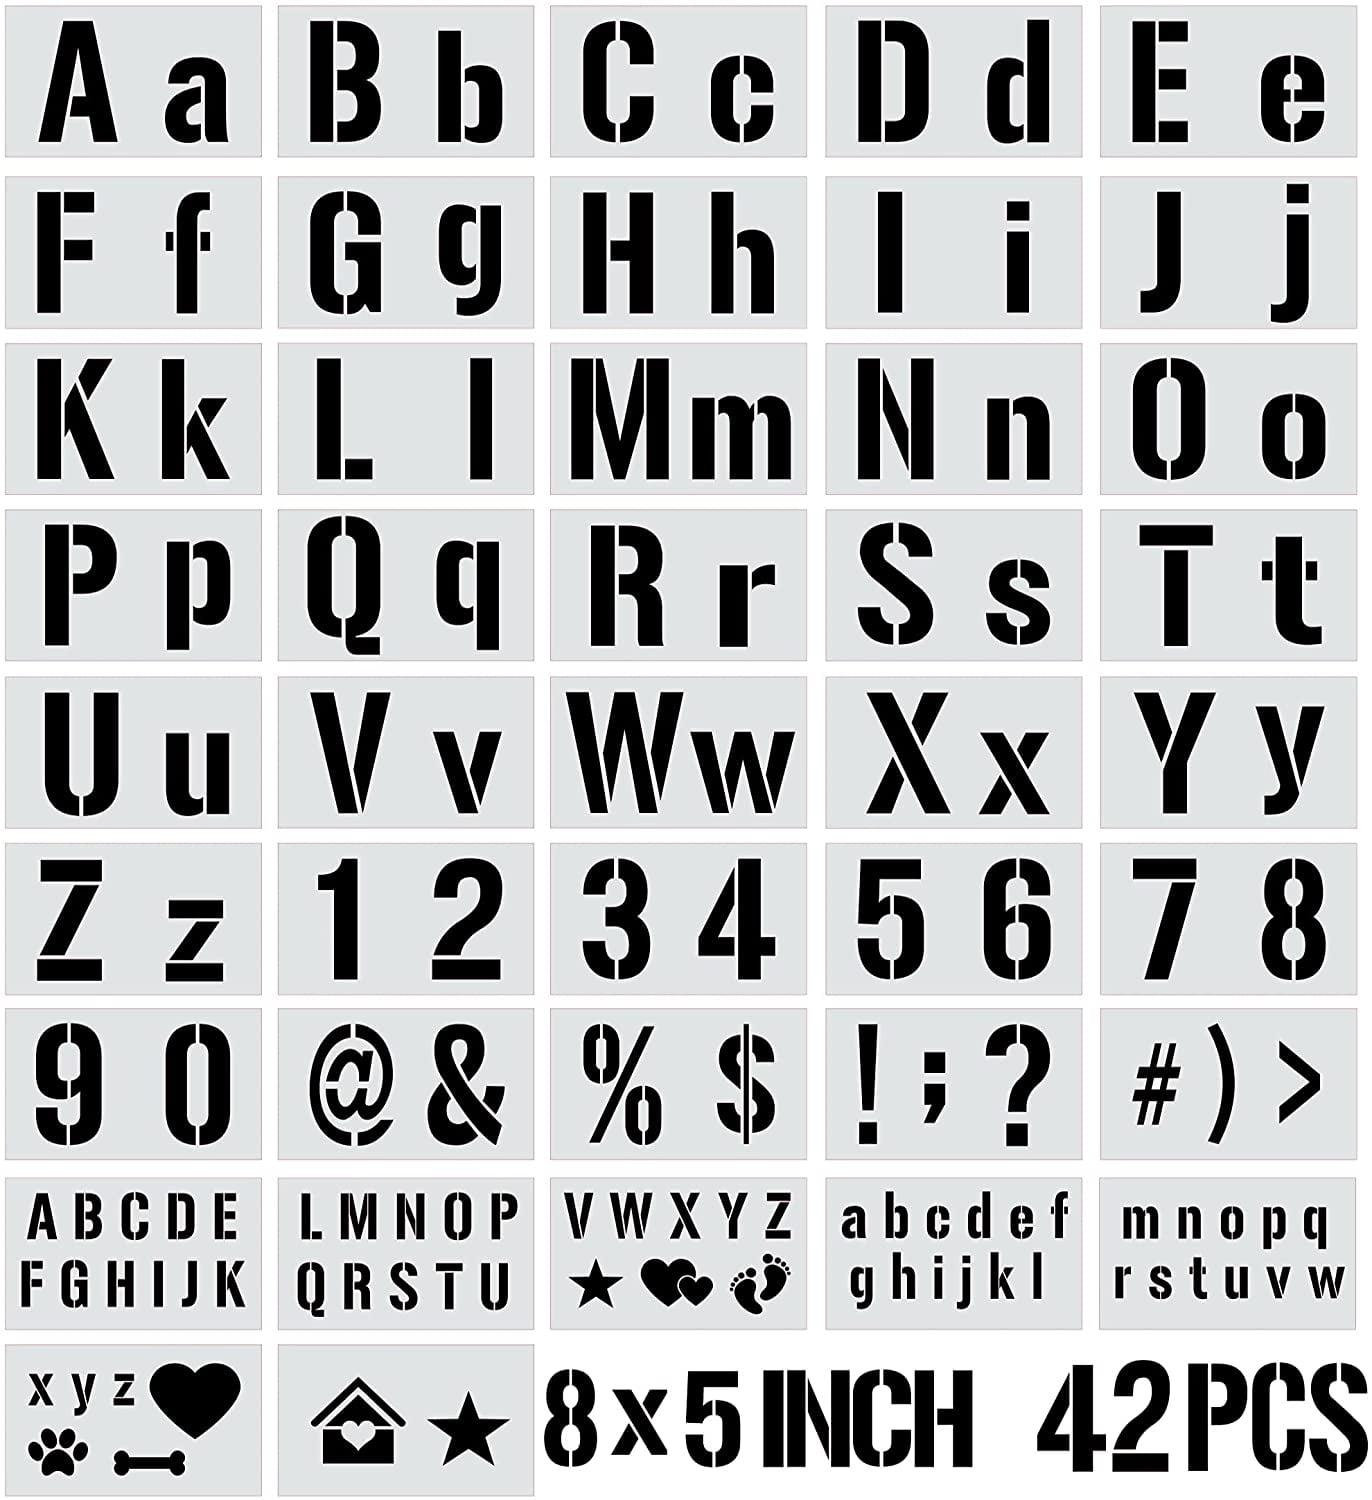 Yamcyh 10 inch Letter Stencils for Painting on Wood ,38pcs Large Alphabet Stencils Stencil Letters Numbers Stencils for Wall Wood Porch